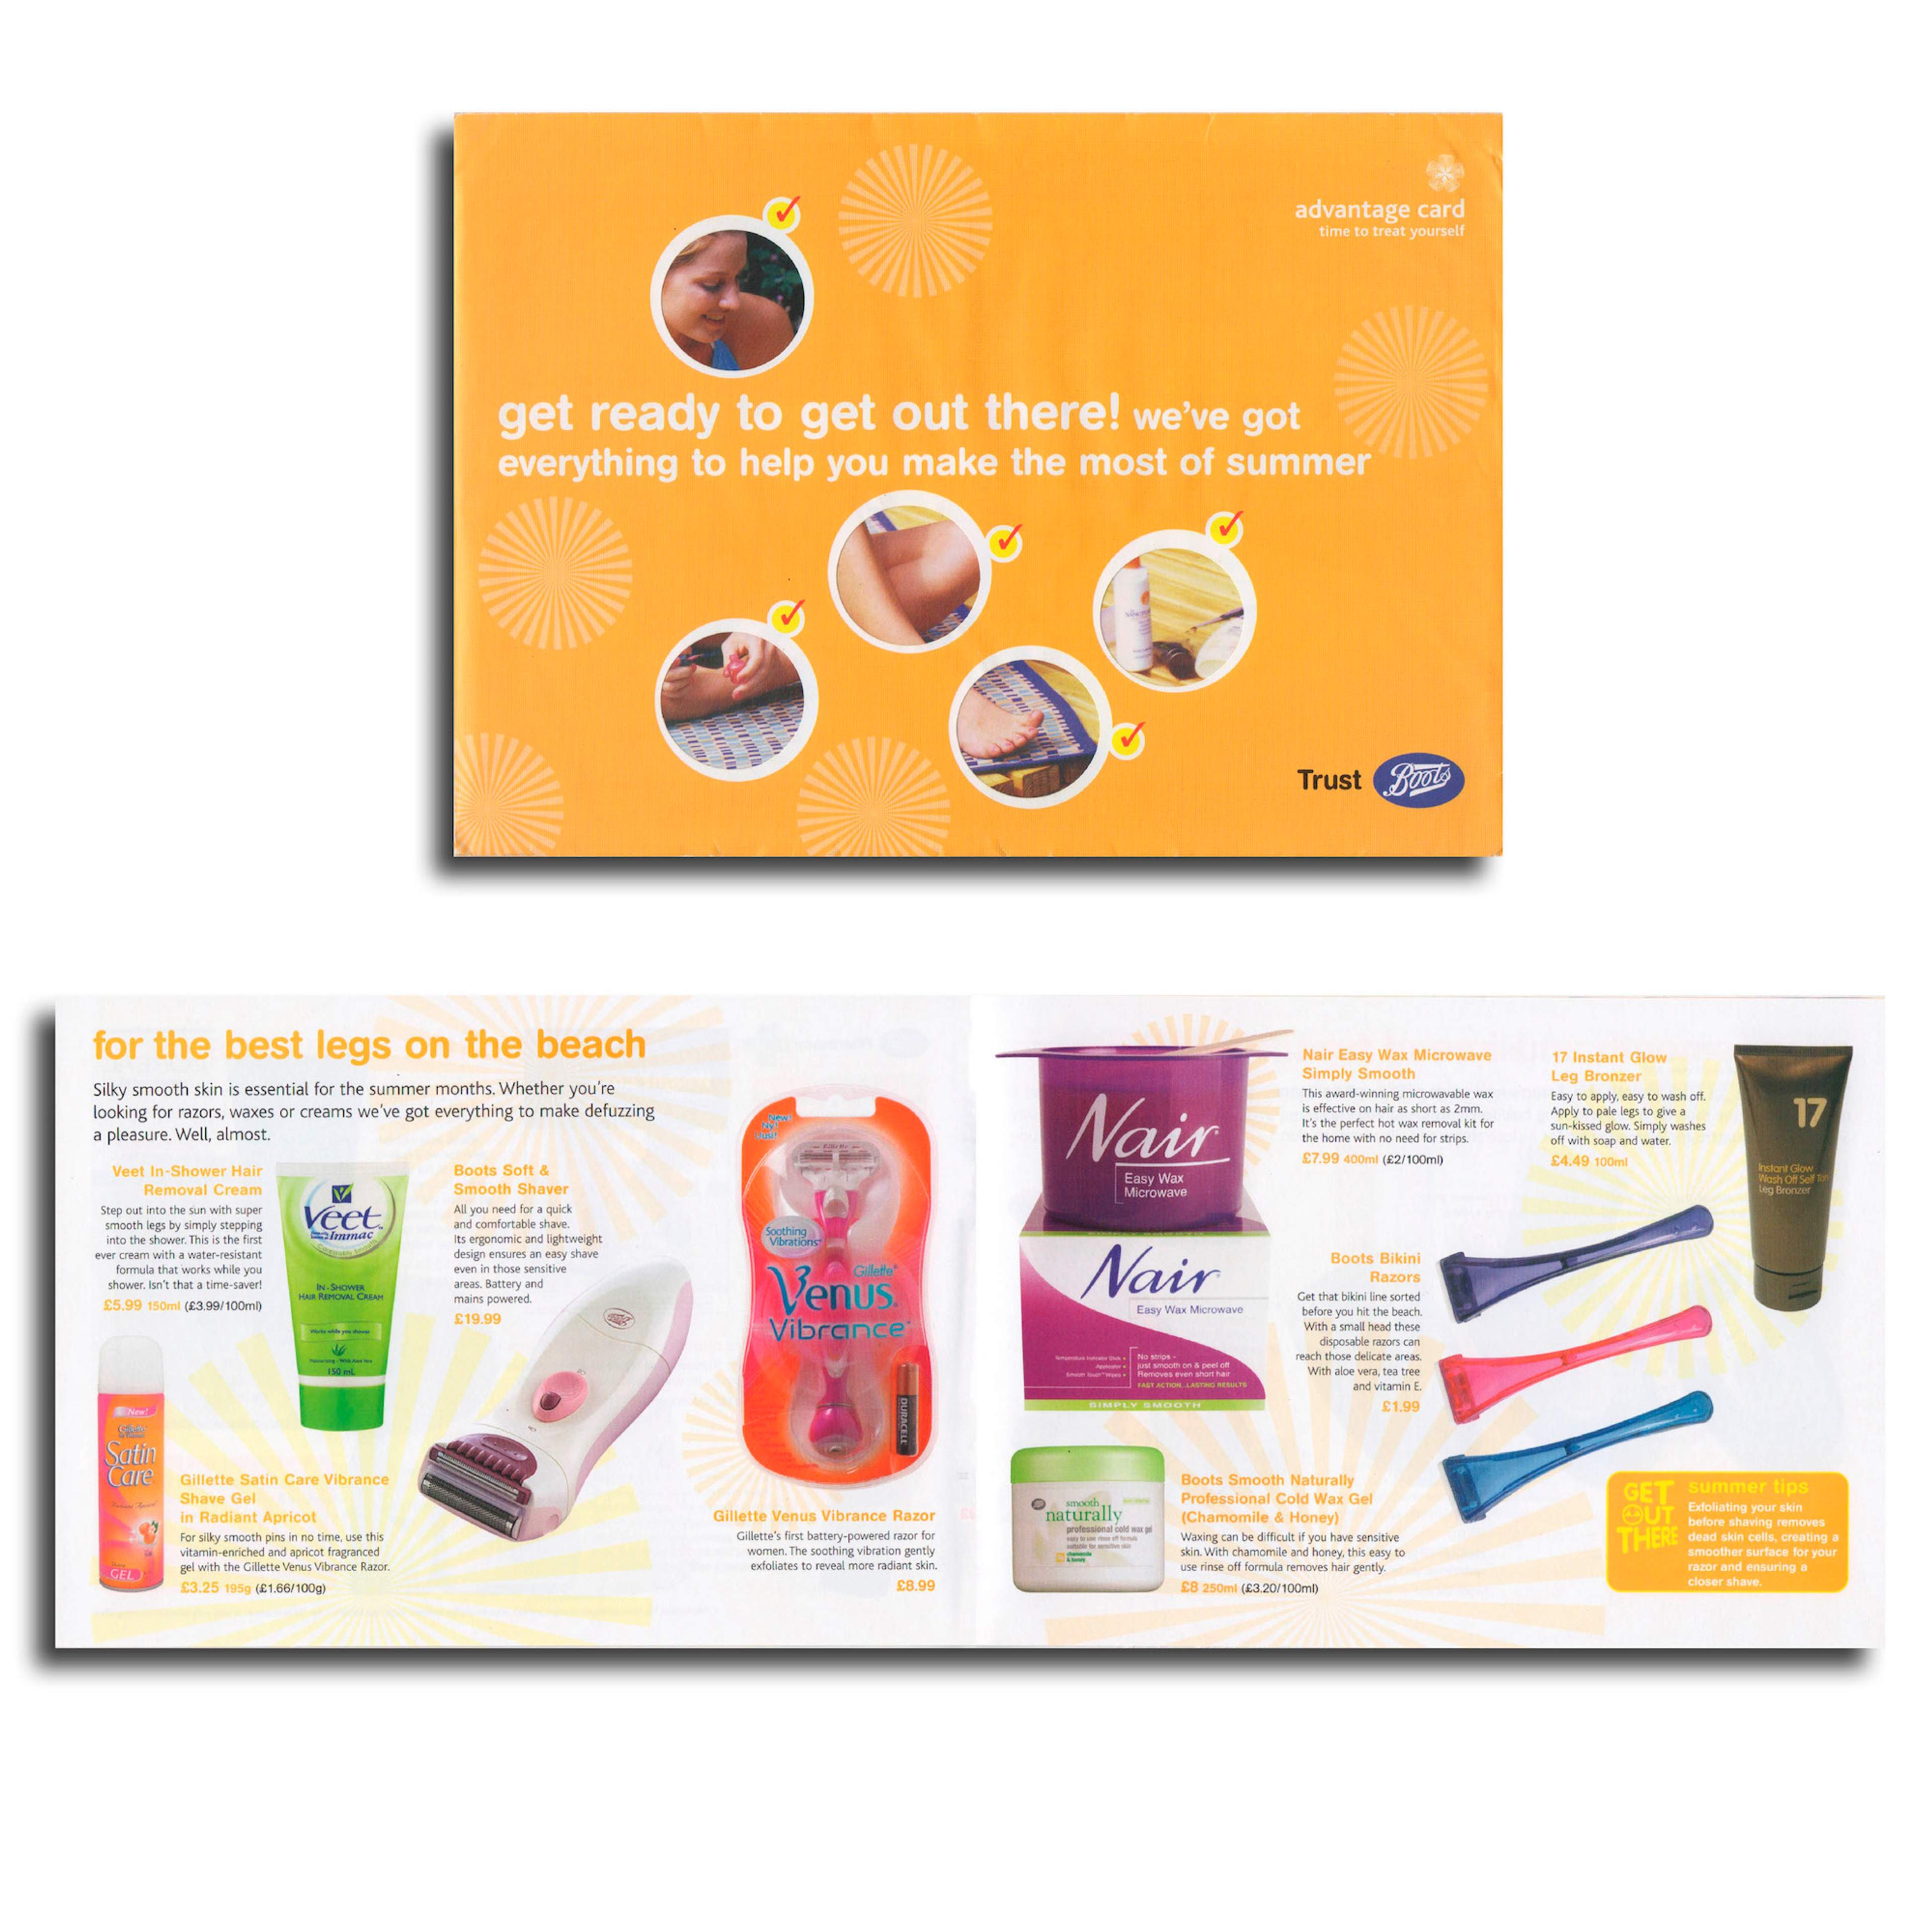 Boots catalogue style direct mail selling all their summer products.